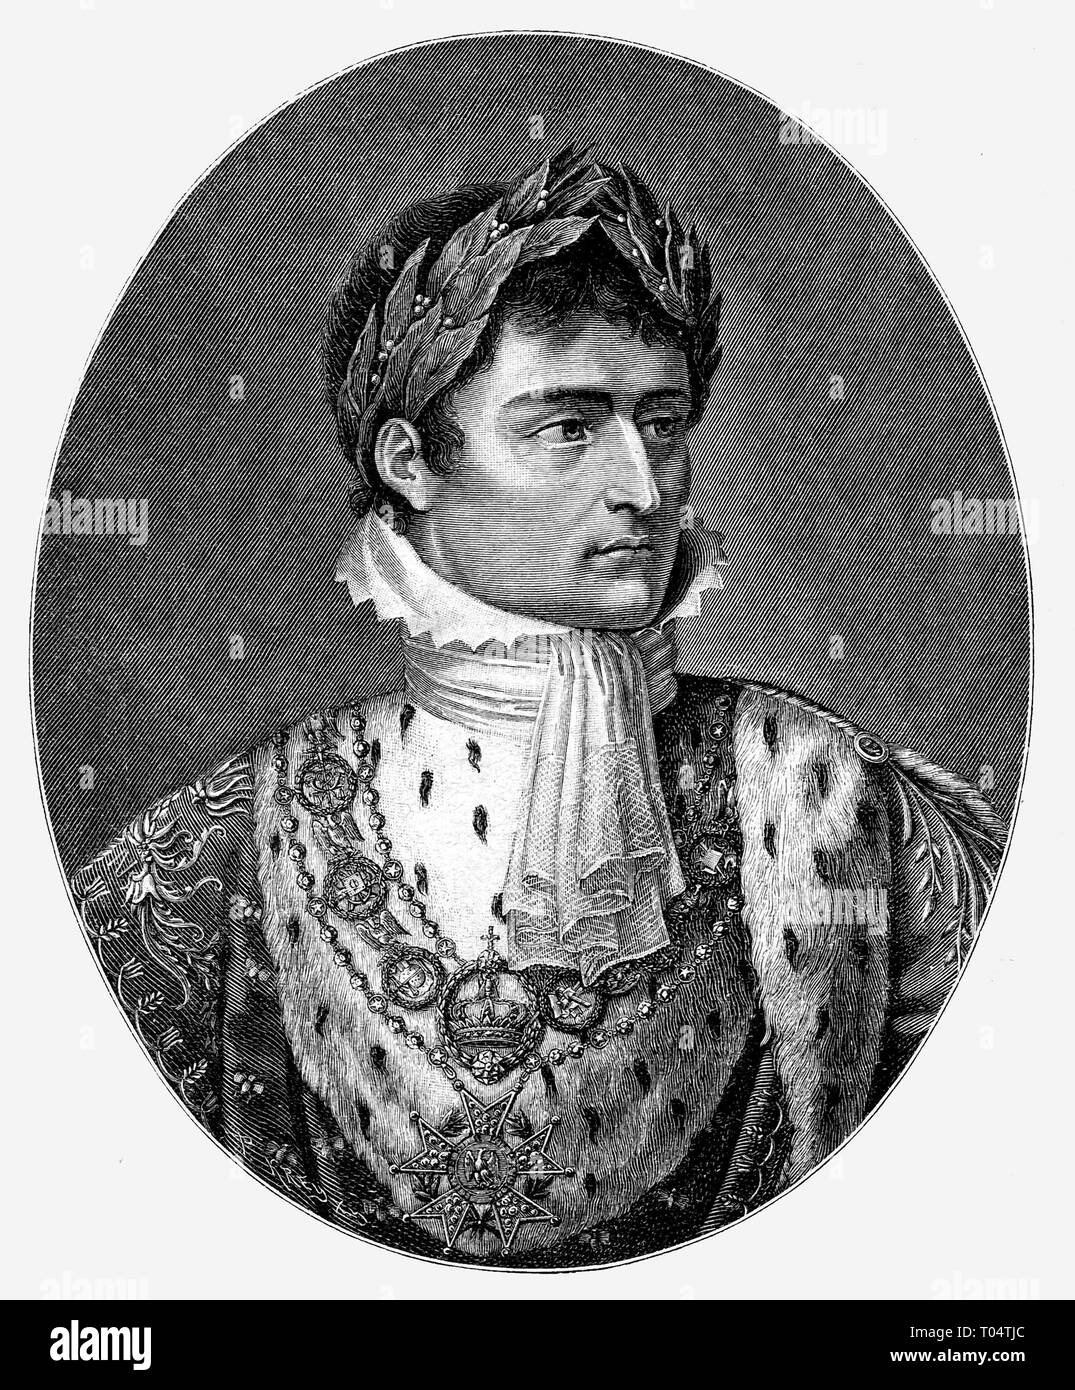 Napoleon I, emperor. Portrait of Charles Chatillon, engraved by Anduin. Digital improved reproduction from Illustrated overview of the life of mankind in the 19th century, 1901 edition, Marx publishing house, St. Petersburg. Stock Photo